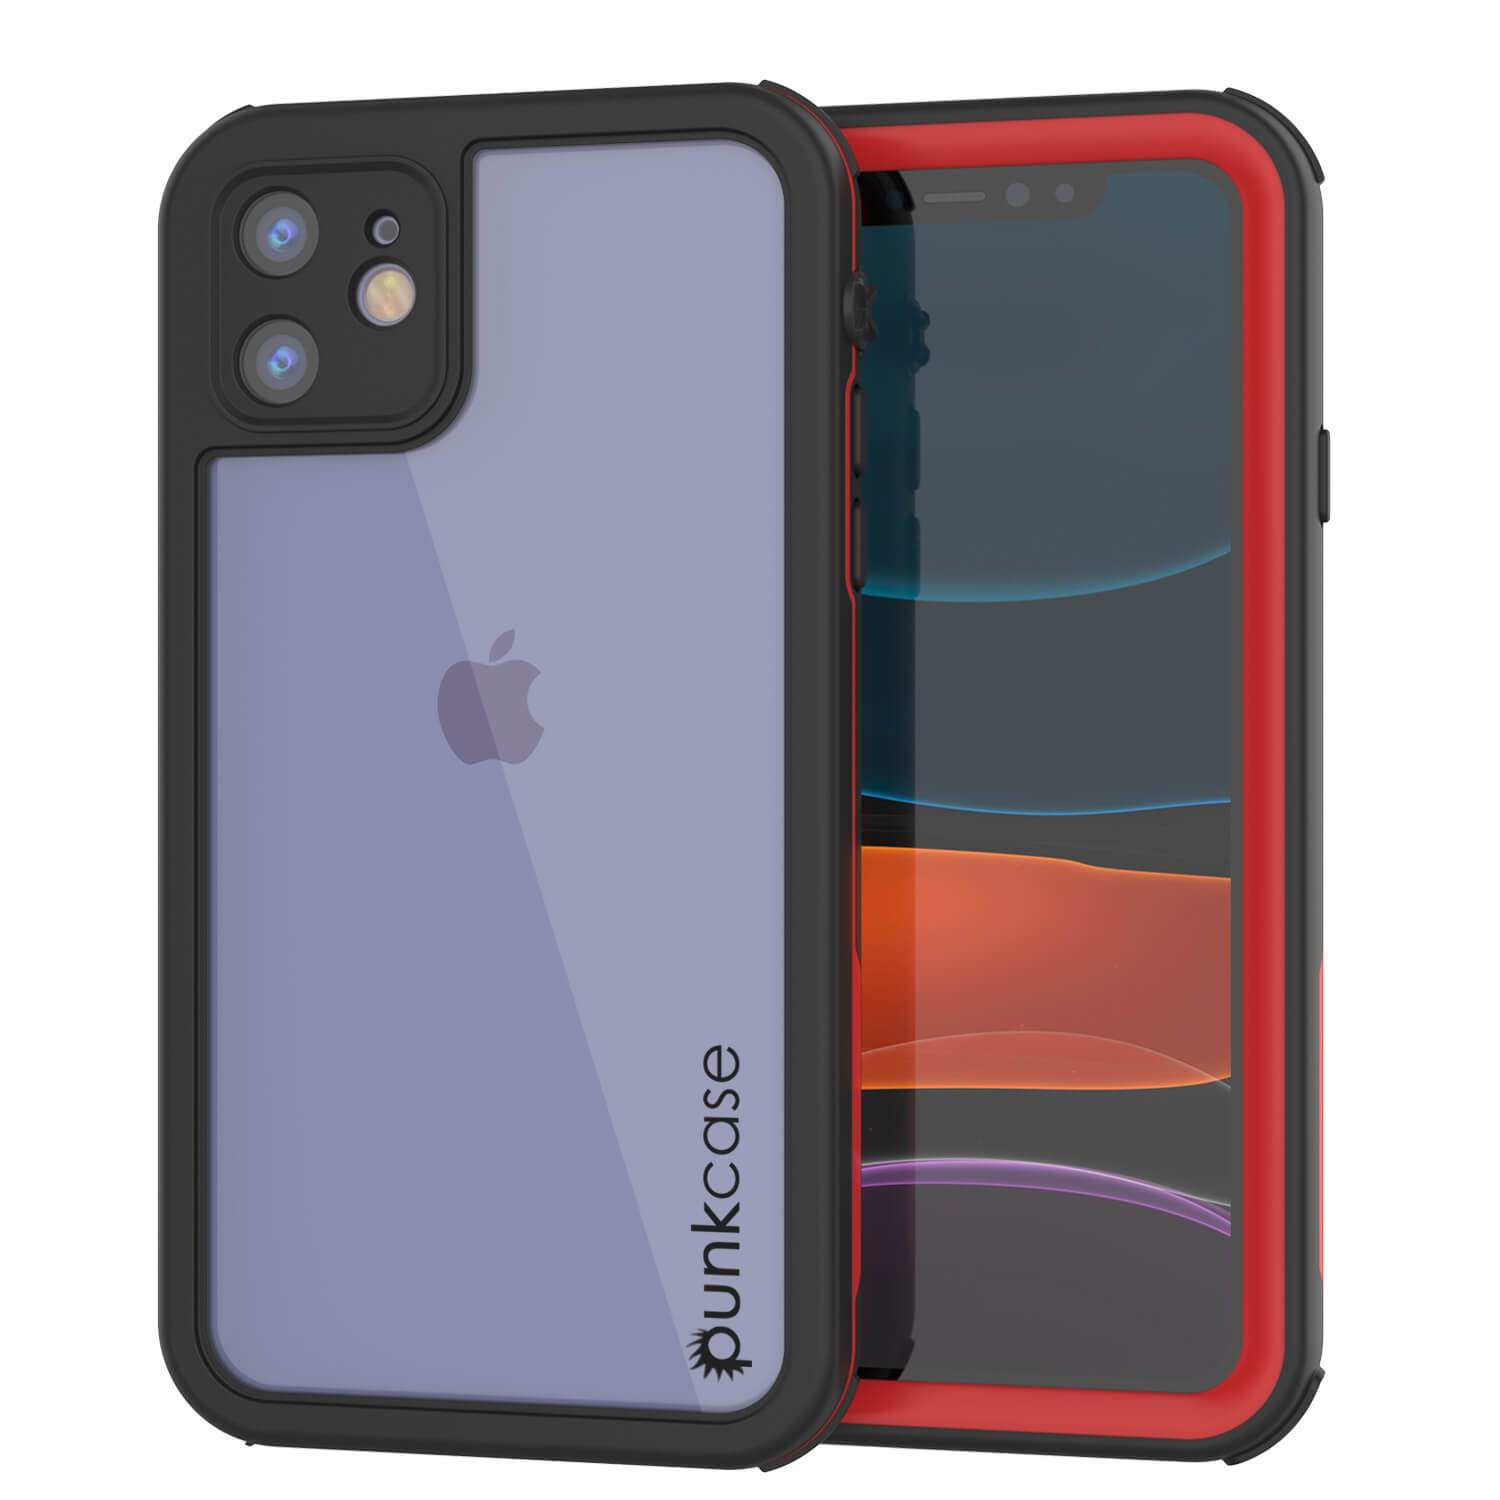 https://www.punkcase.com/cdn/shop/products/punkcase_waterproof_case_rapture_protective_certified_full_body_cover_w_build_in_screen_protector_clear_back_dustproof_shockproof_snowproof_compatible_apple_iPhone_11_innovative_desig_5d33f7e8-eb69-4173-ade2-e2261359e378.jpg?v=1594751787